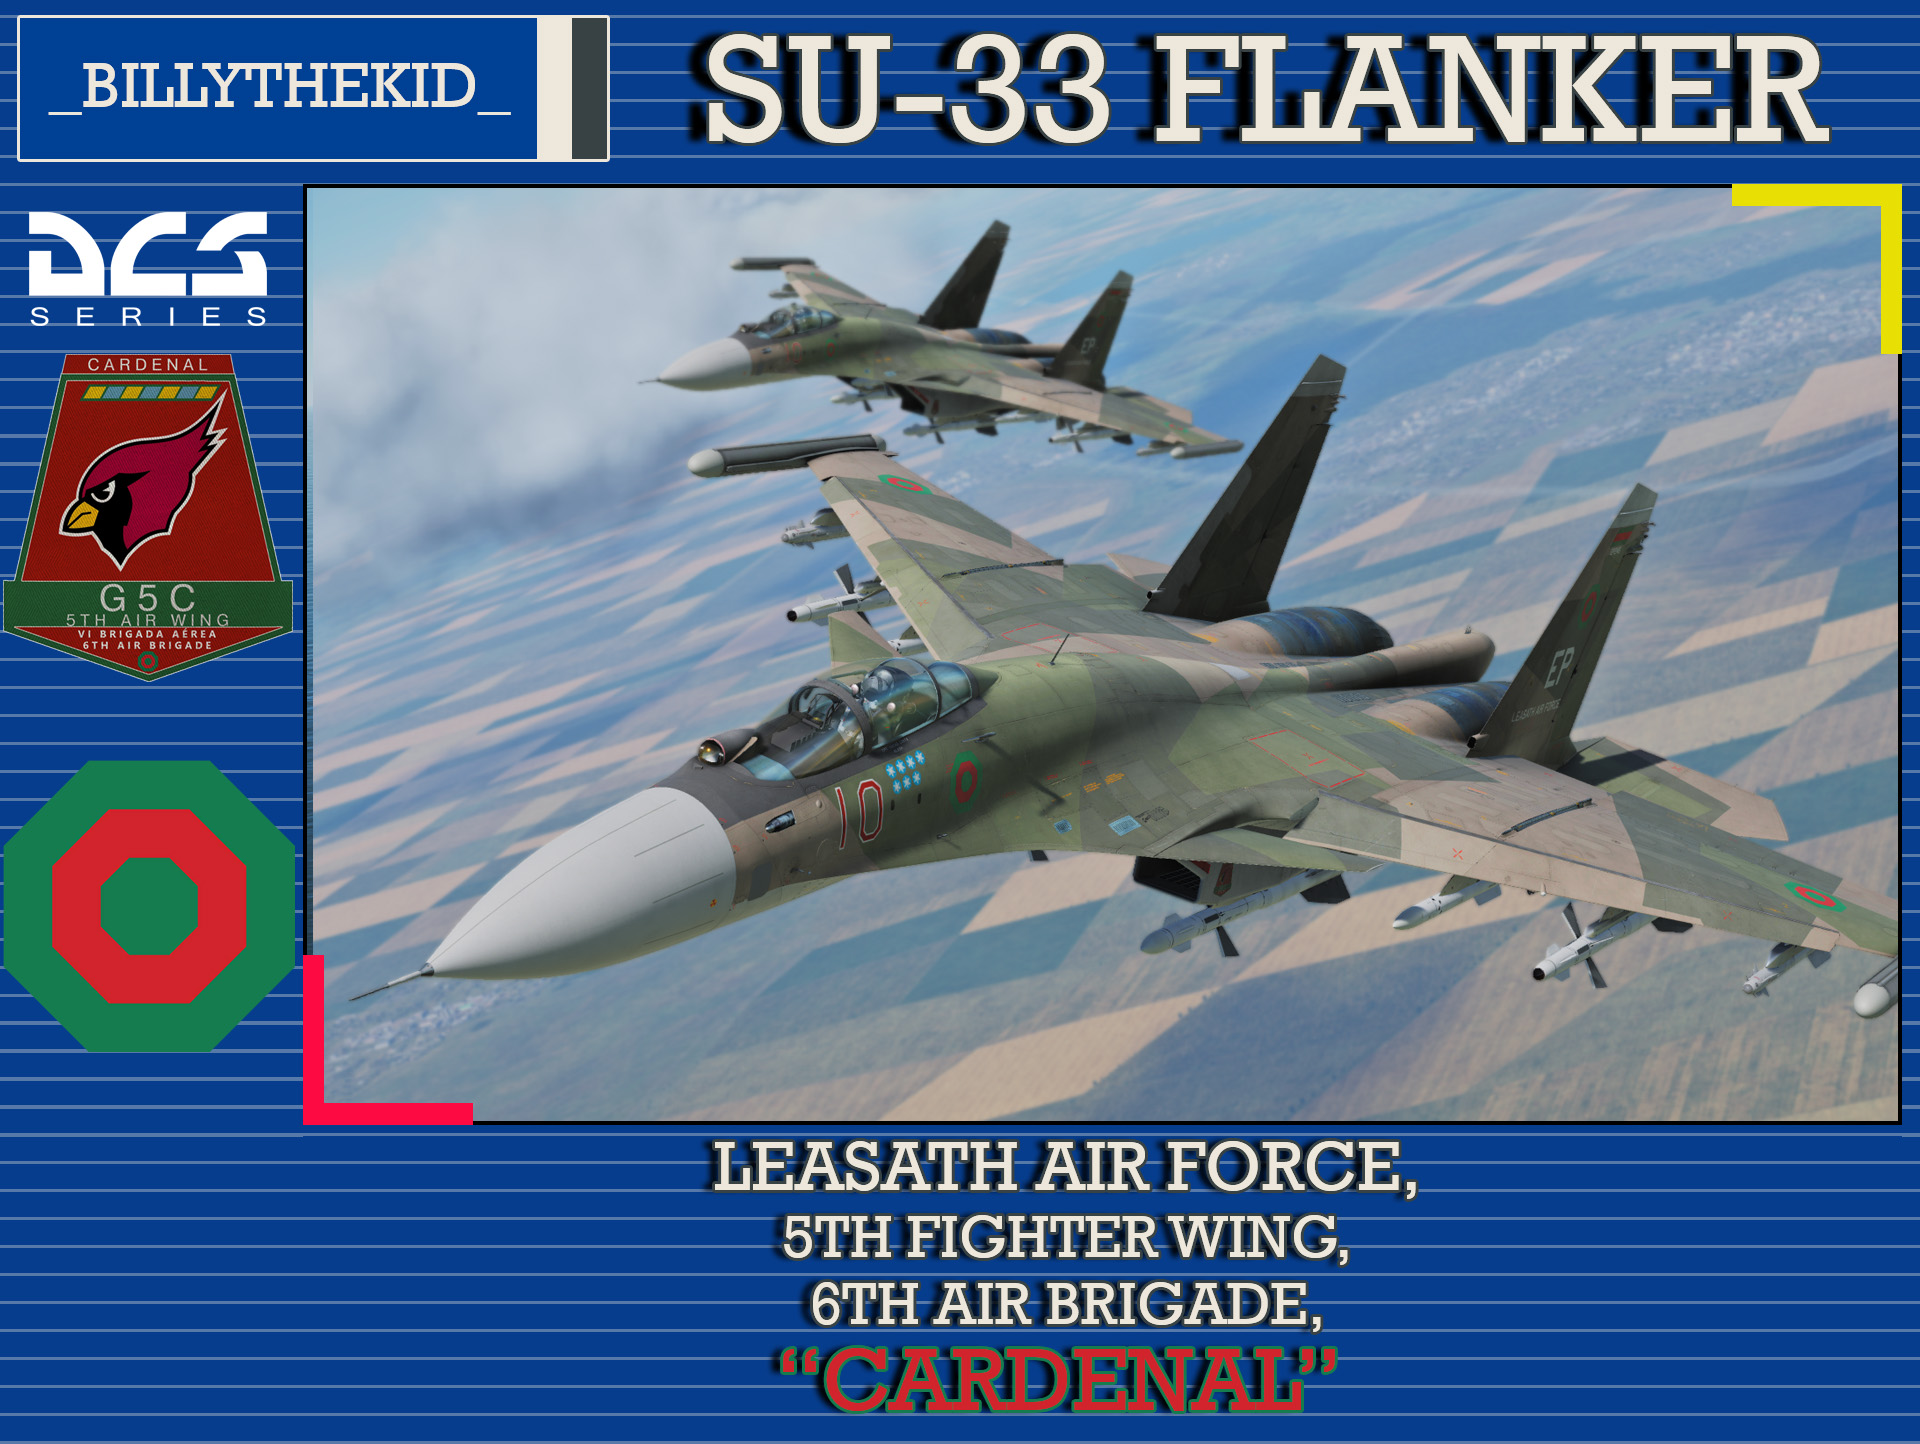 Ace Combat - Leasath Air Force 5th Fighter Wing, 6th Air Brigade "Cardenal" SU-33 Flanker